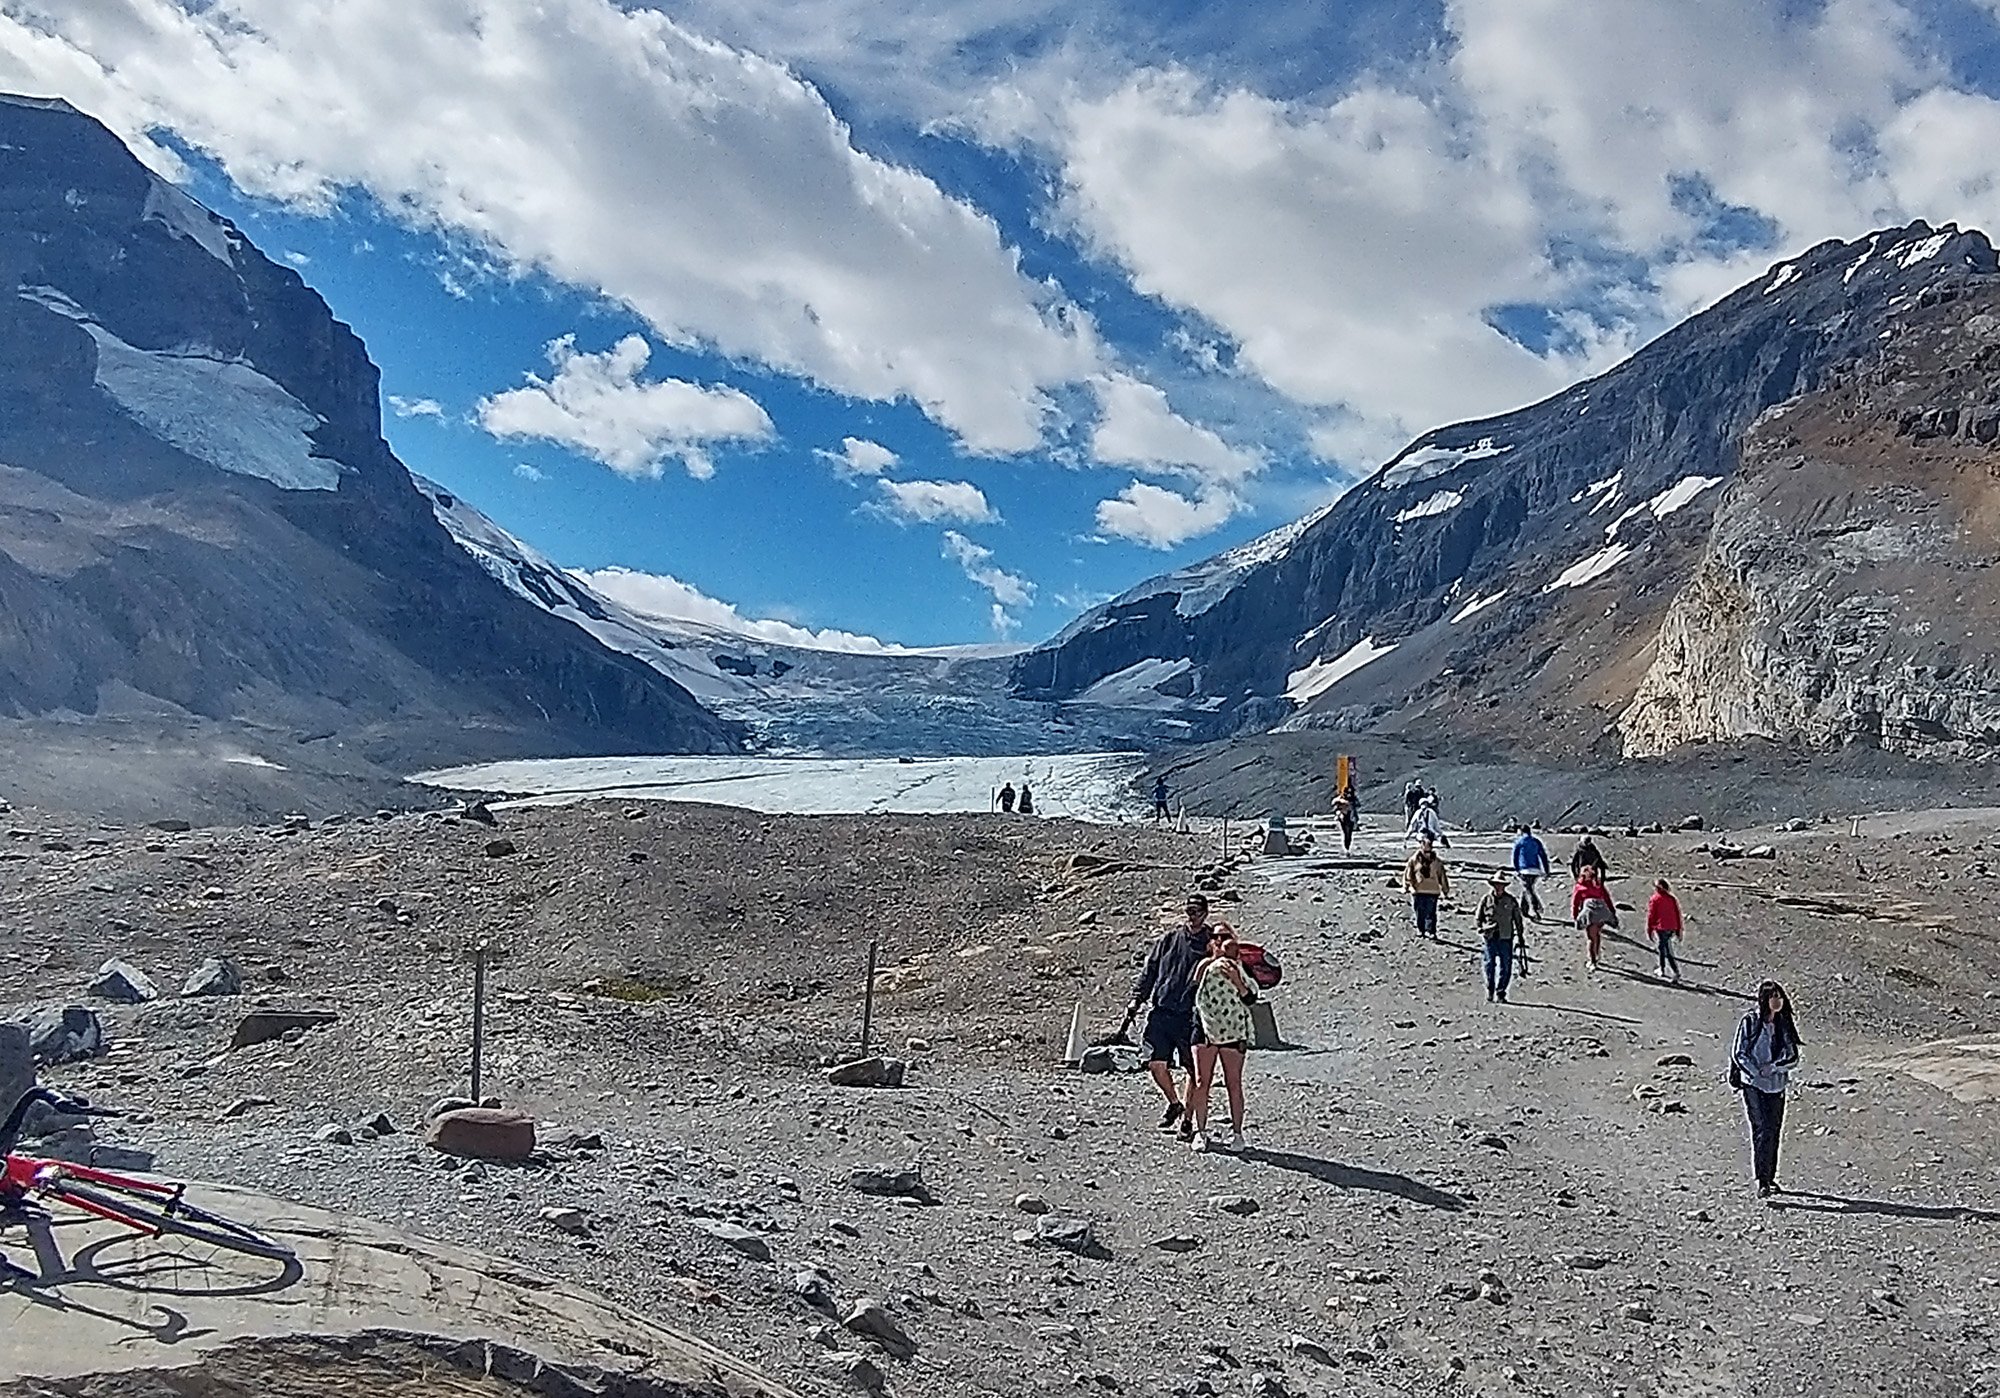 Can you believe all these dumbass tourists still showing up, knowing it used to extend further? Wow. The world would truly be completely different if there was more of this ice here.